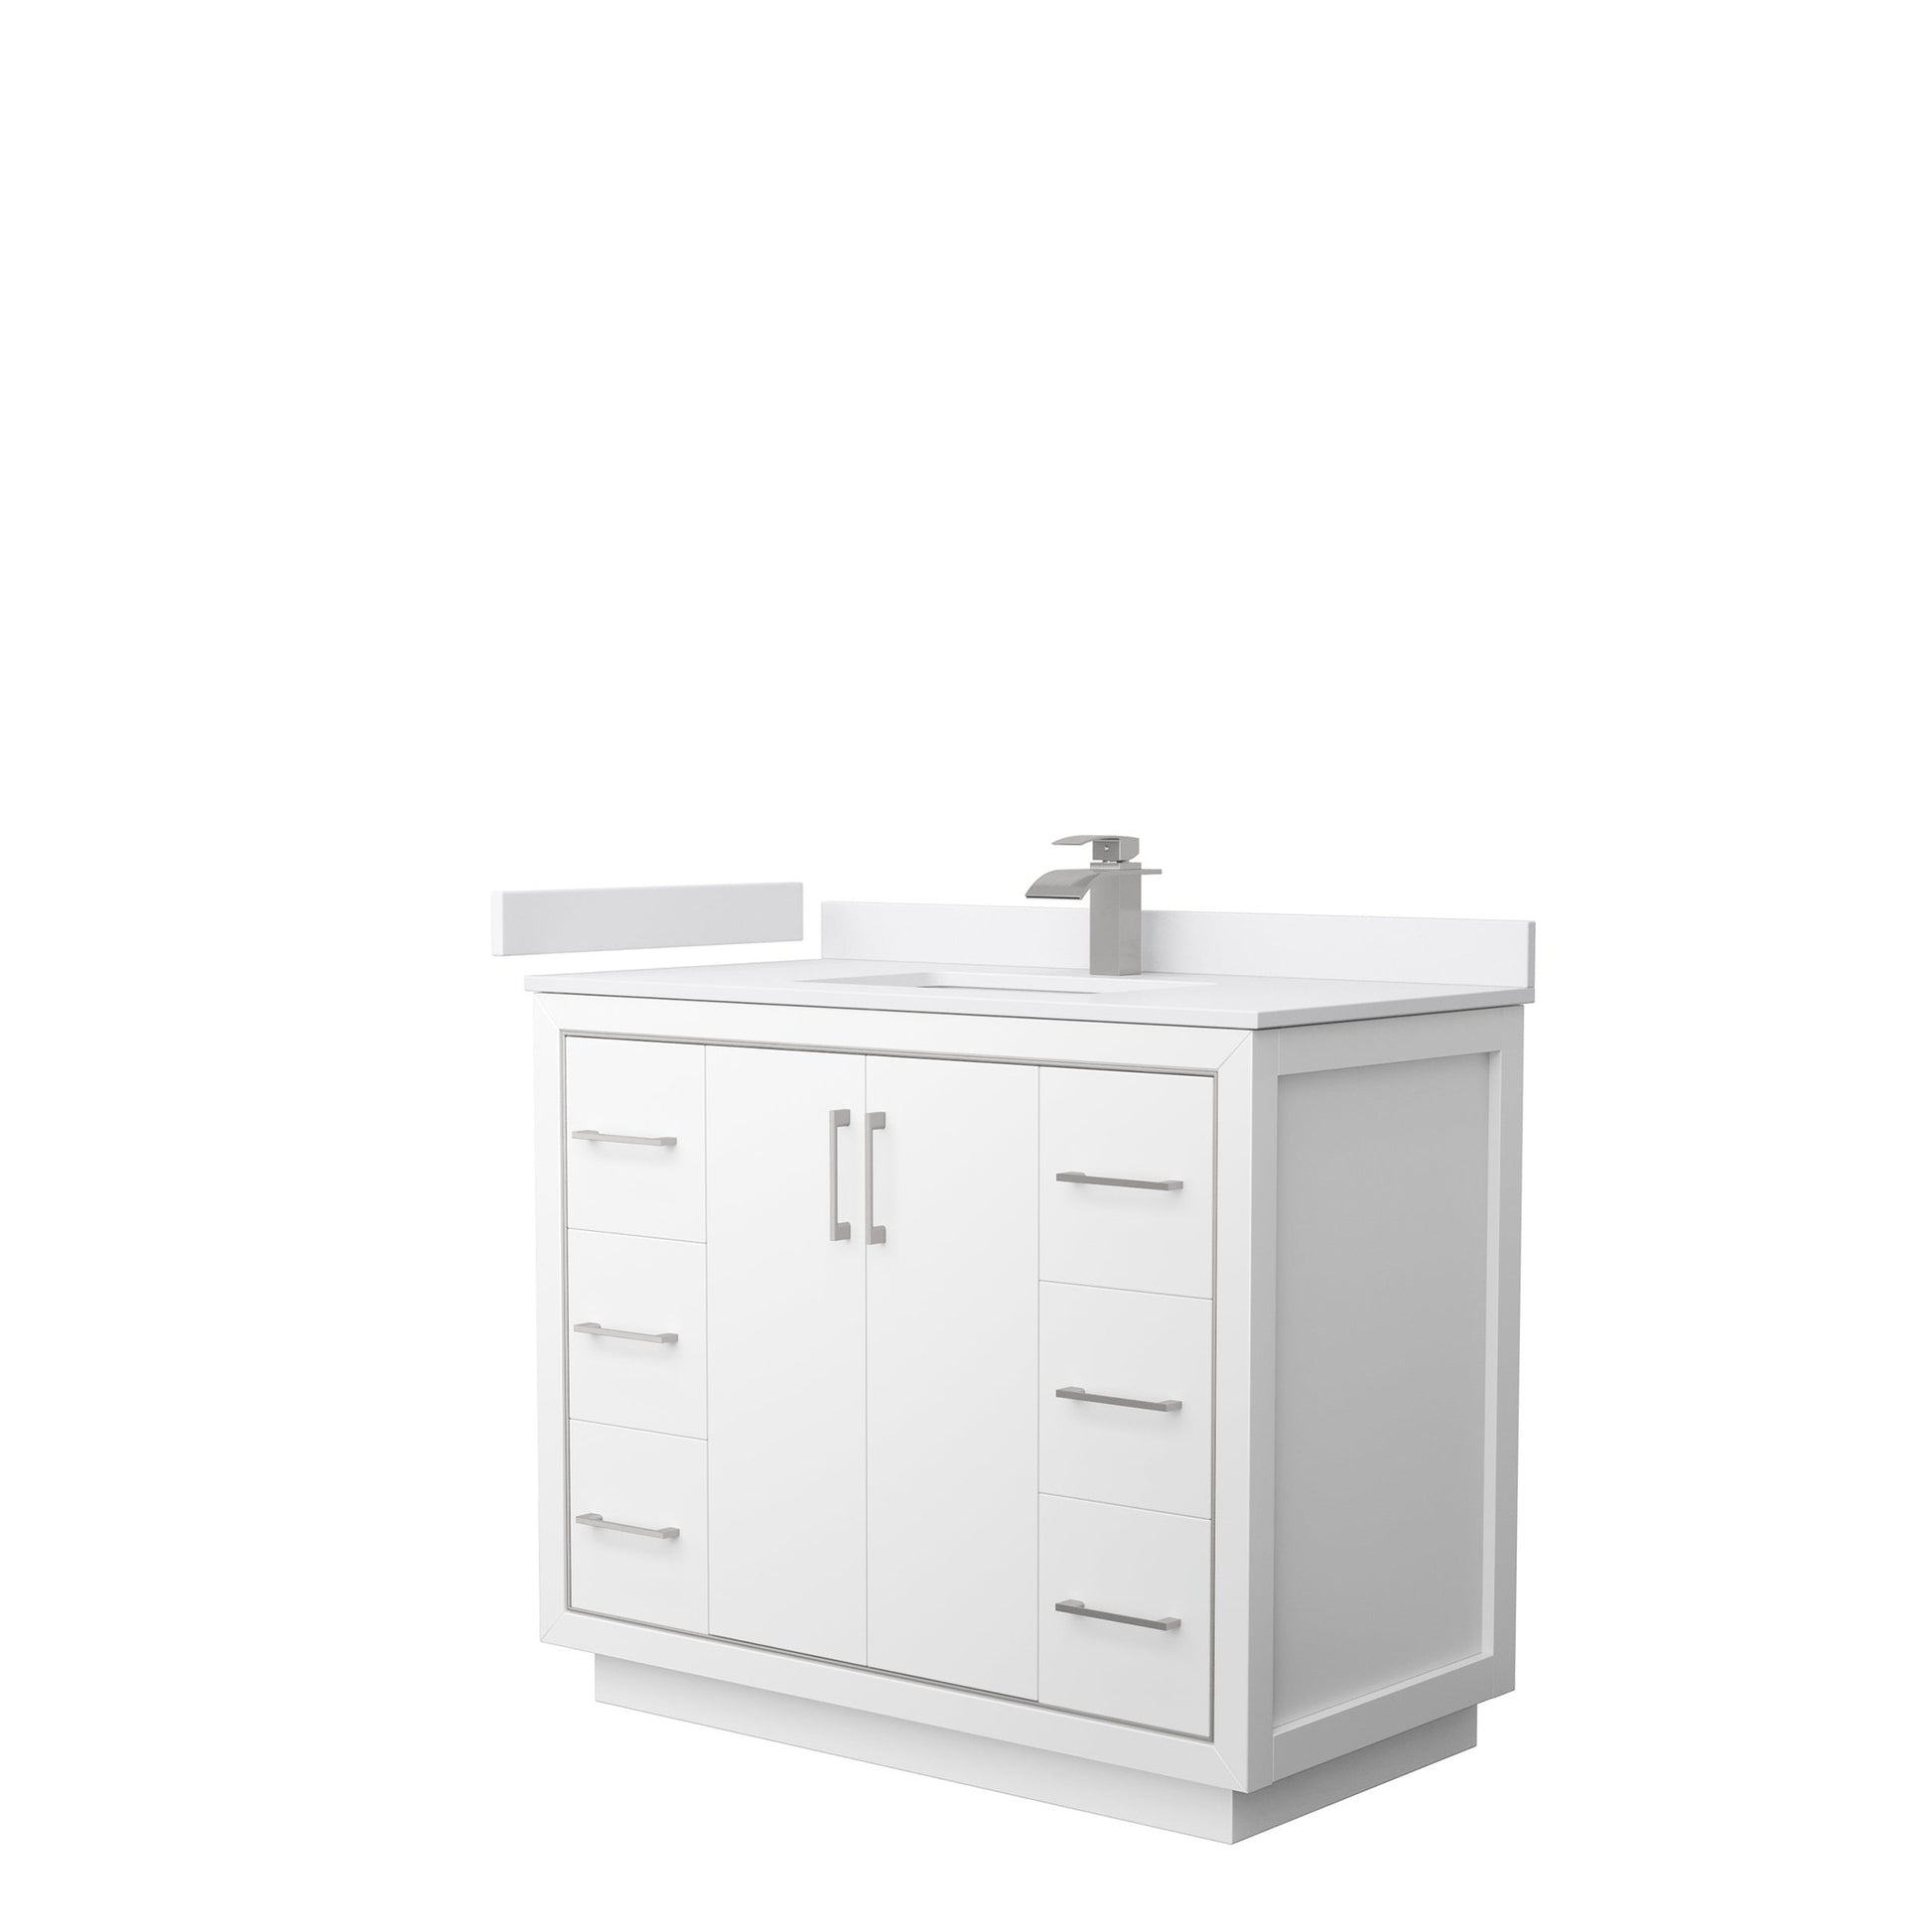 Wyndham Collection Icon 42" Single Bathroom Vanity in White, White Cultured Marble Countertop, Undermount Square Sink, Brushed Nickel Trim